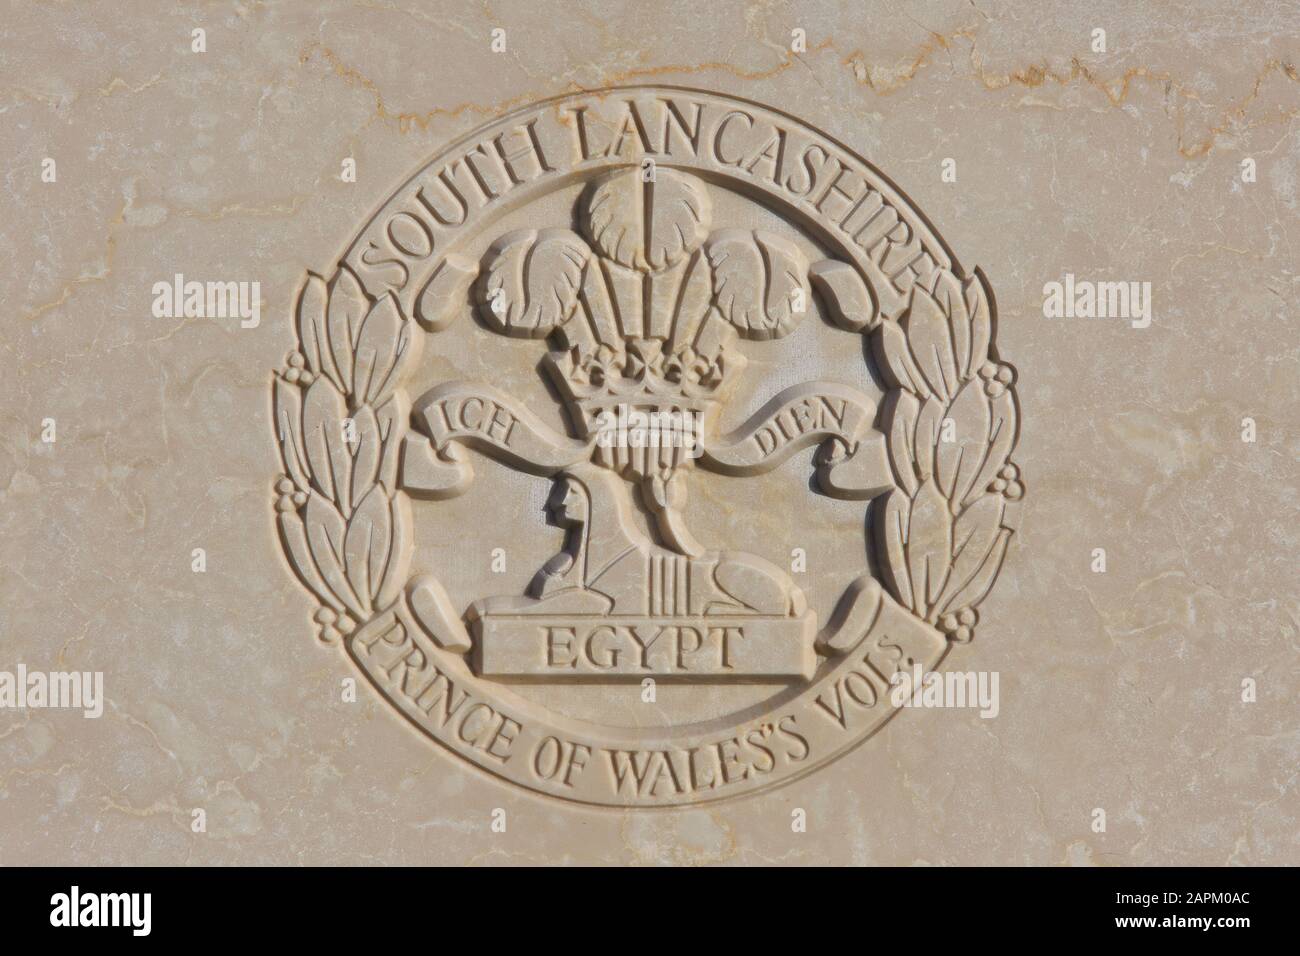 The Prince of Wales's Volunteers South Lancashire Regiment regimental emblem on a World War I headstone at Tyne Cot Cemetery in Zonnebeke, Belgium Stock Photo